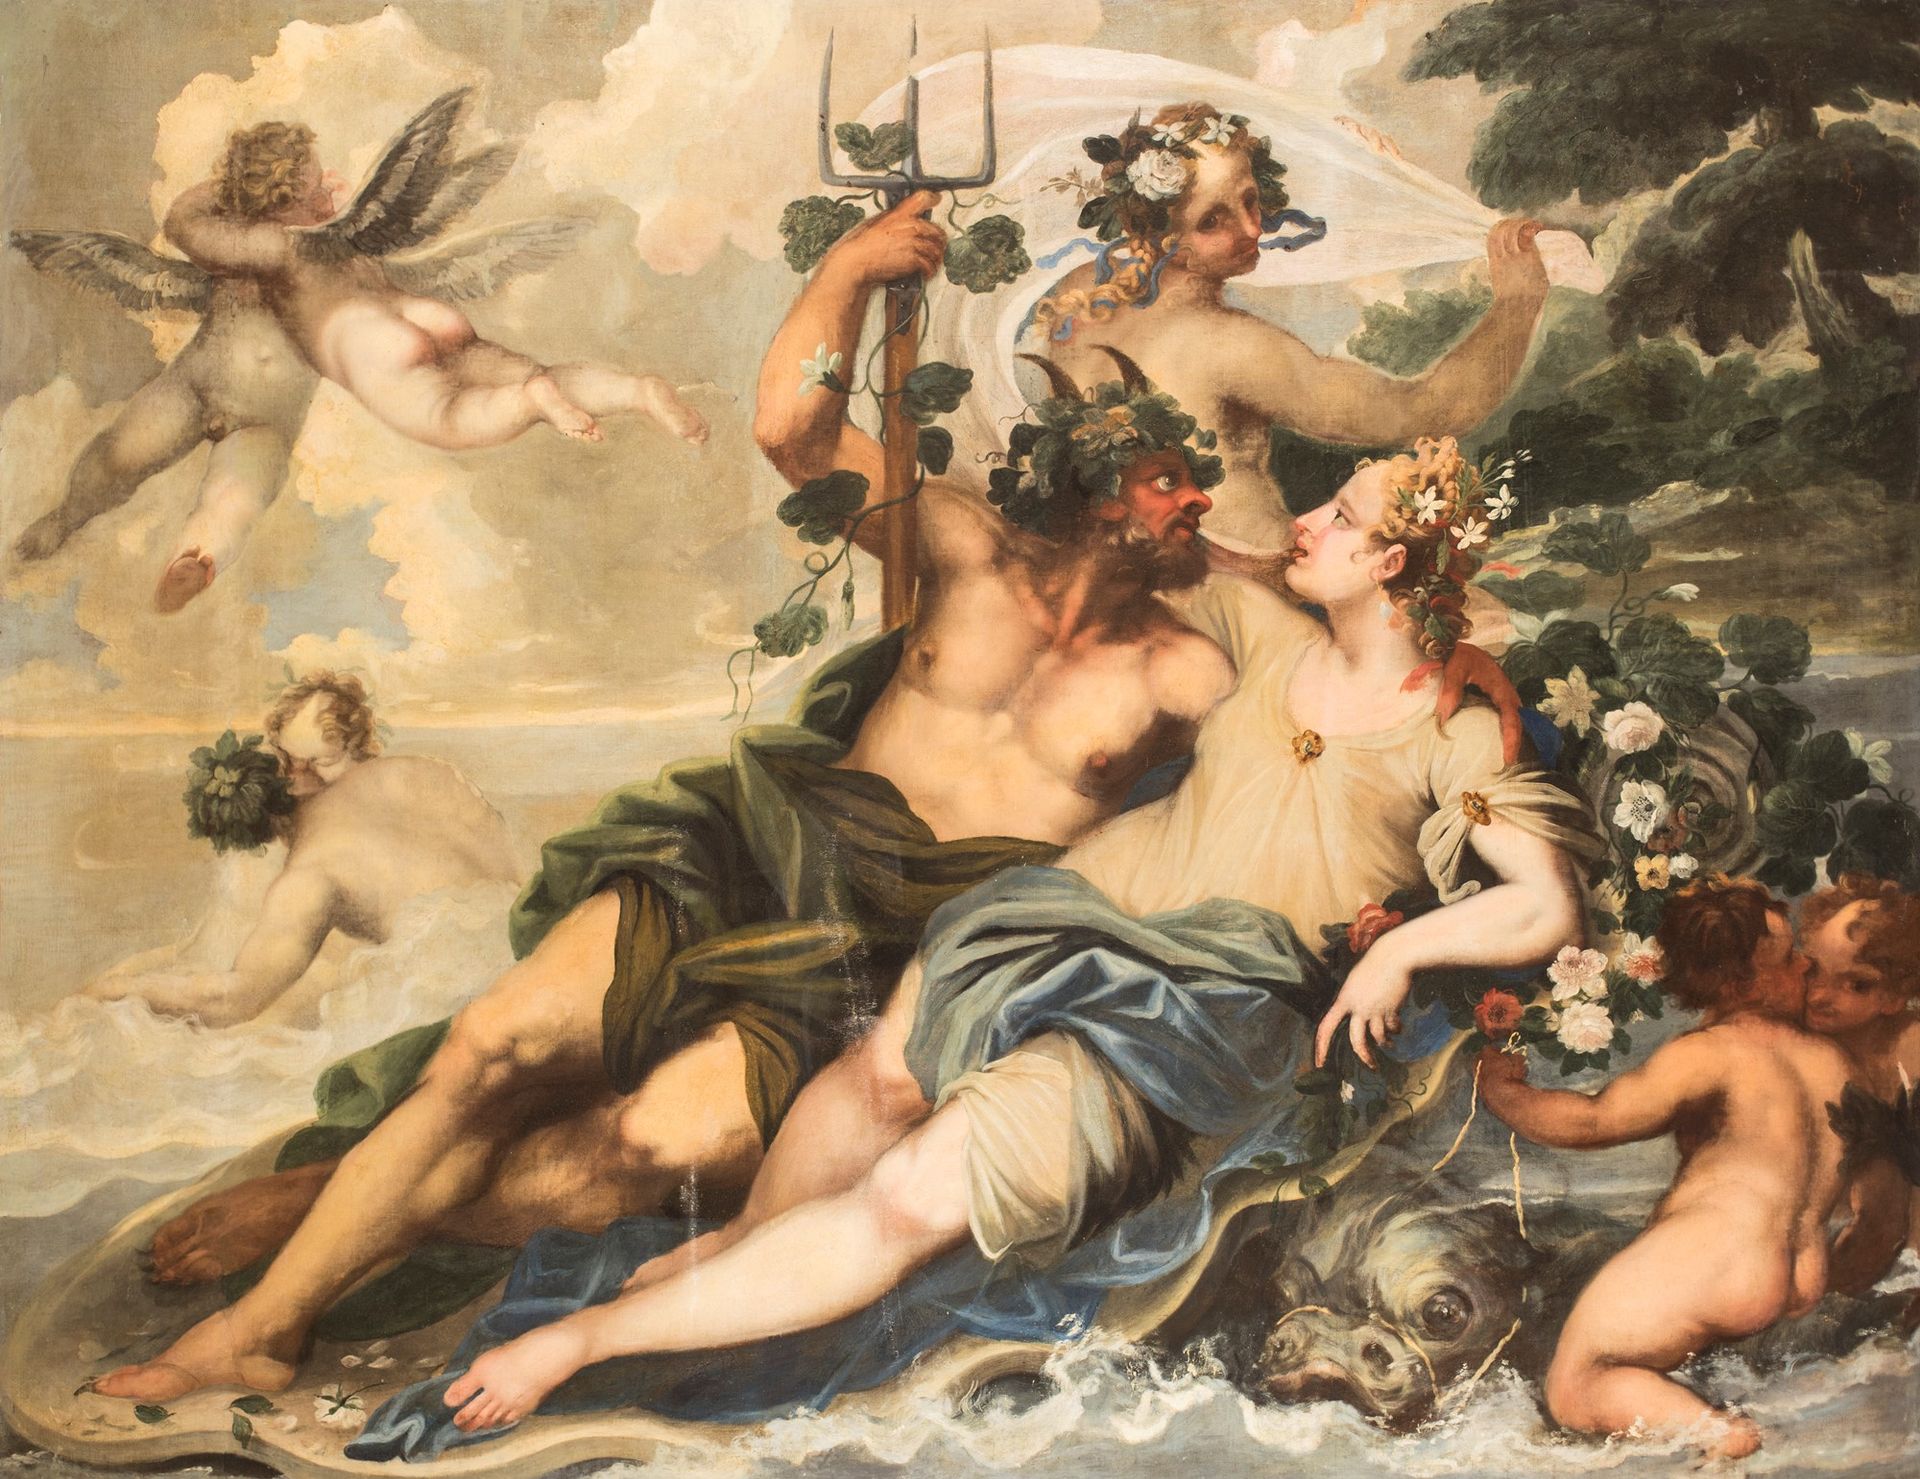 Federico Cervelli (attribuito) Allegory of Lust This large painting, with the ti&hellip;